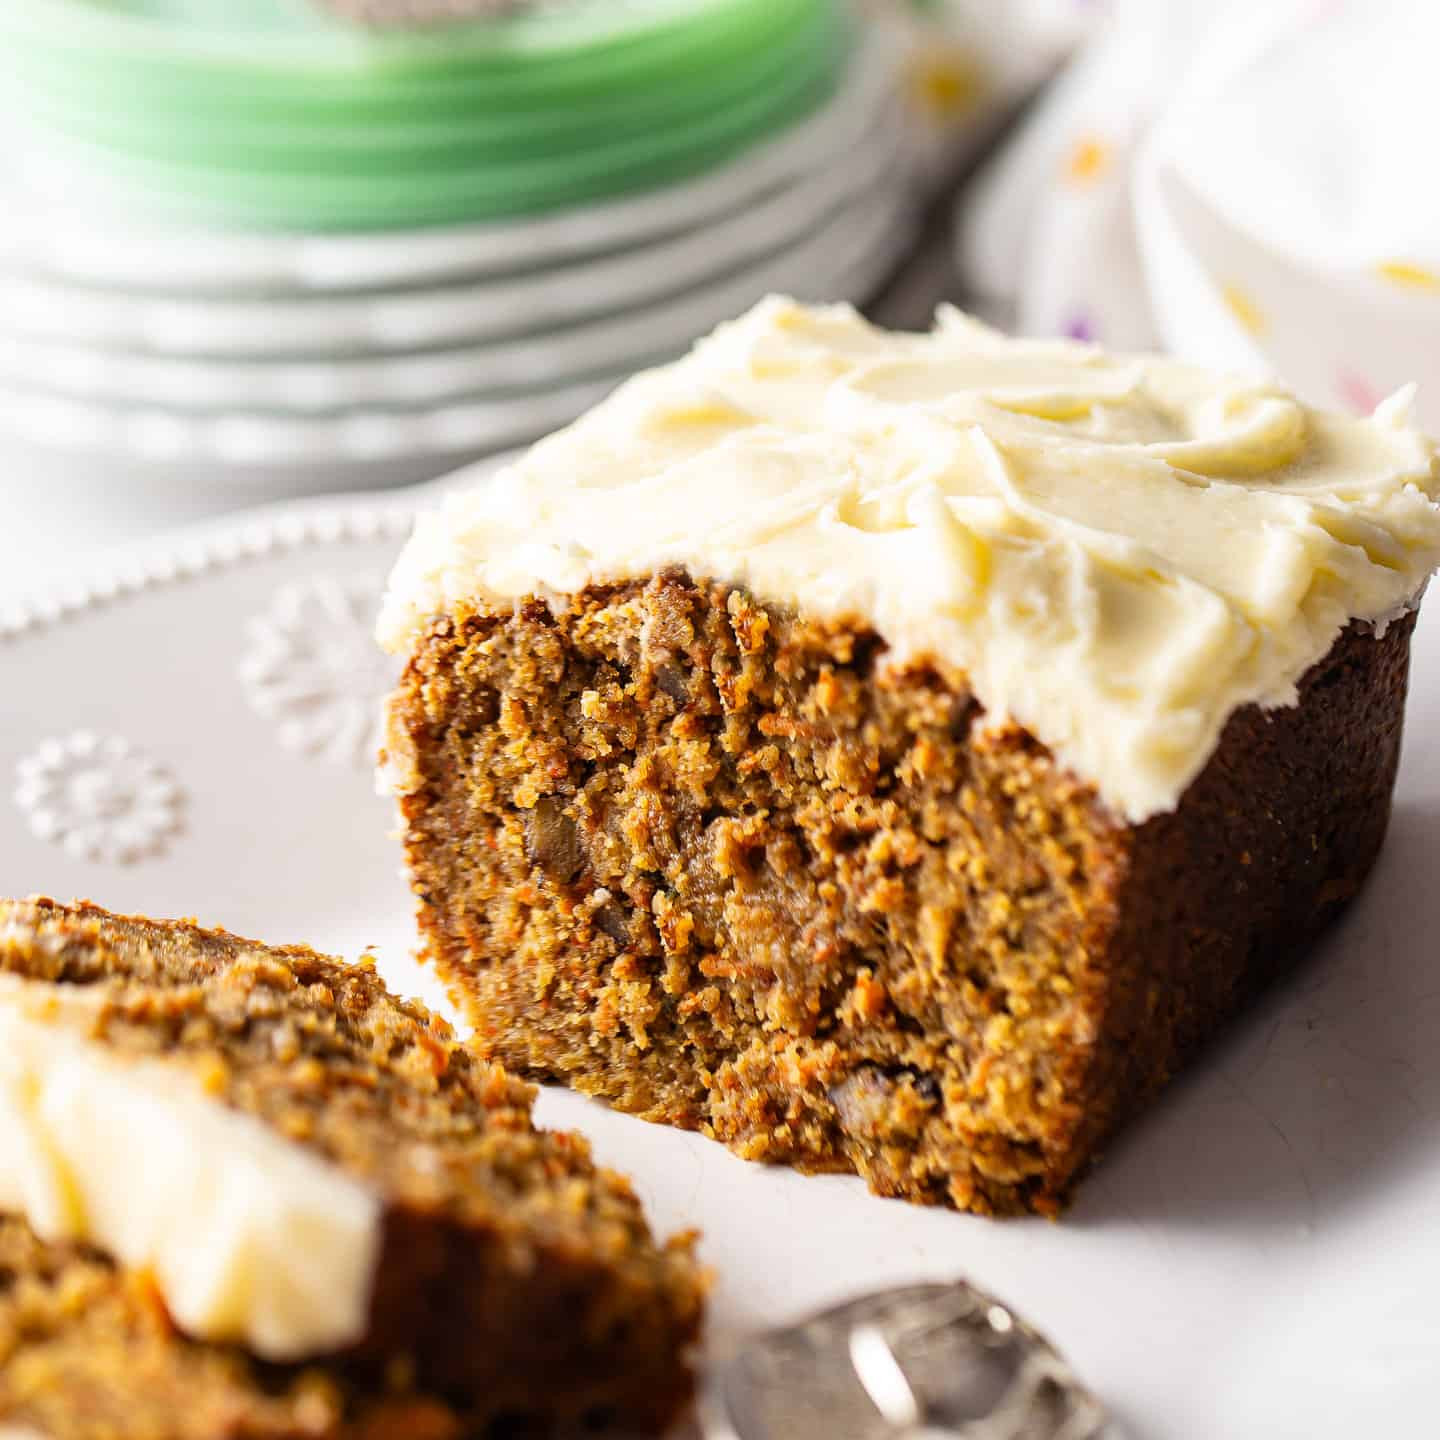 Carrot cake loaf with a thick blanket of cream cheese frosting.